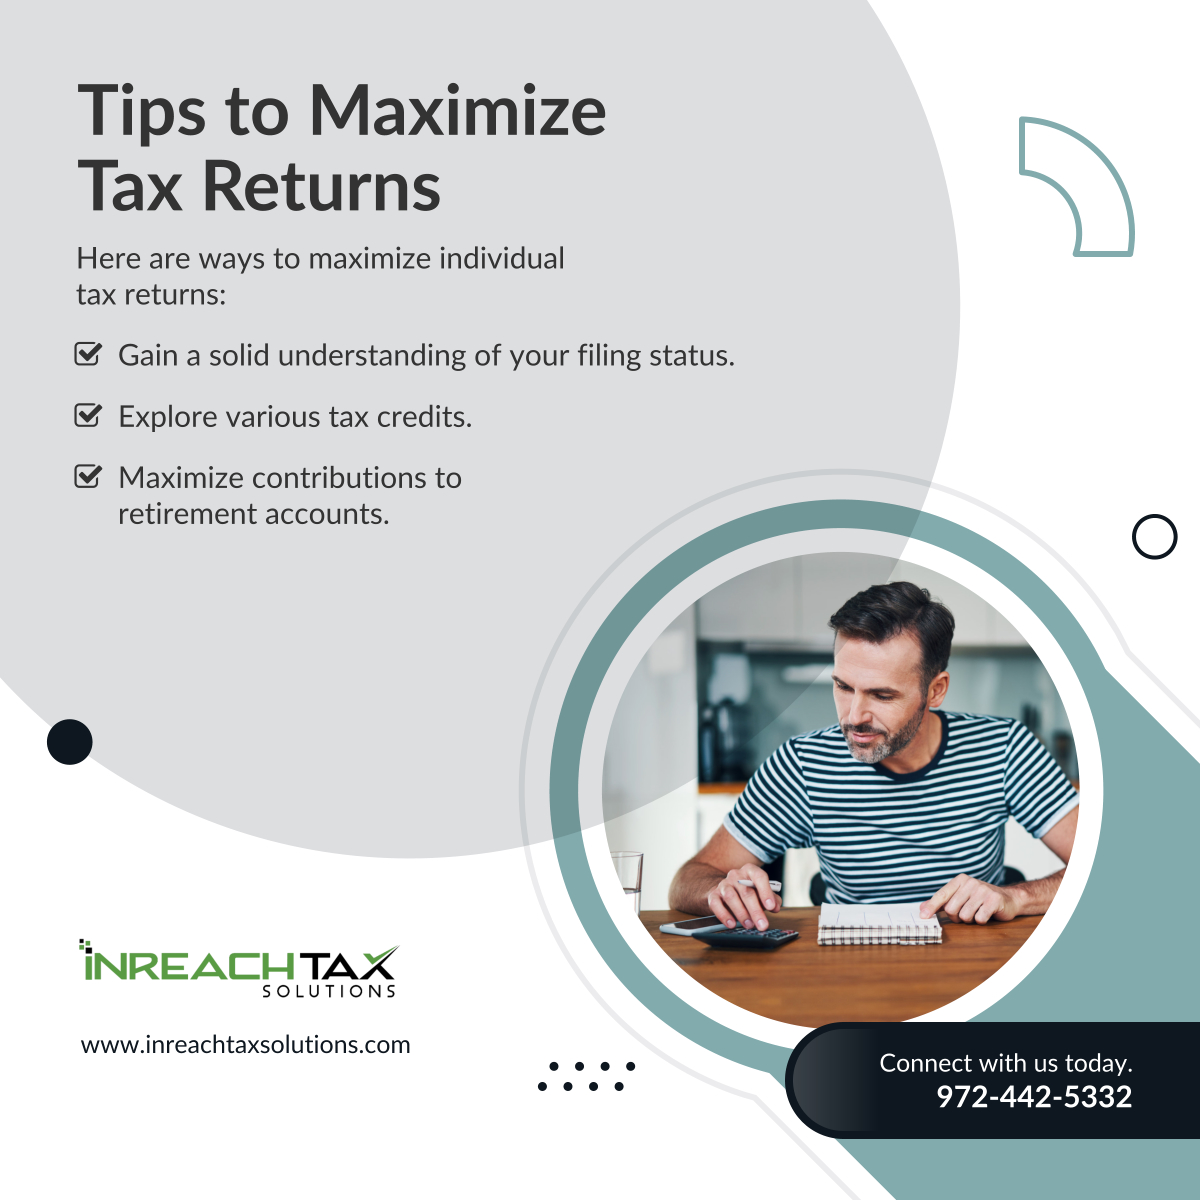 Filing your annual tax return can be a challenging process, especially if you end up with a smaller refund than anticipated. Learning to maximize your return can help you avoid filing surprises and fines.
 
#WylieTX #IndividualTaxReturn #TaxServices